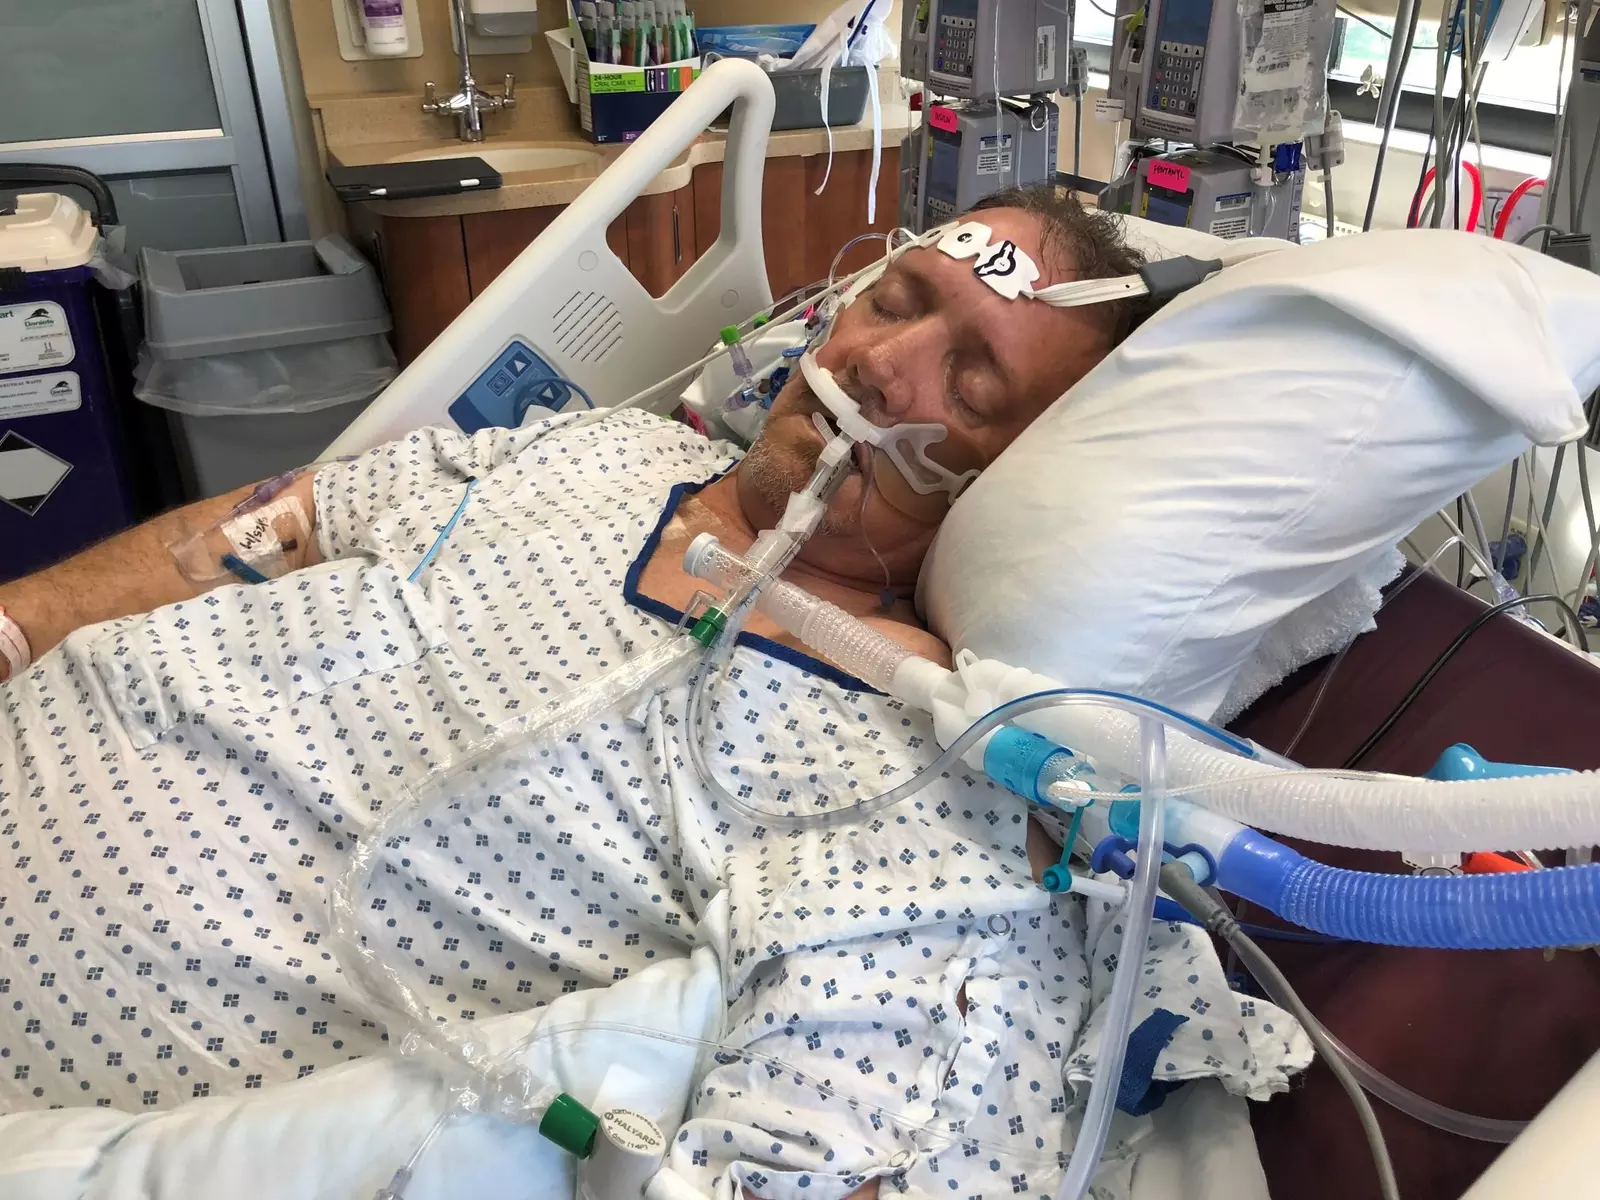 From "exploding heart" to full recovery for Roy Reid thanks to AdventHealth ER.